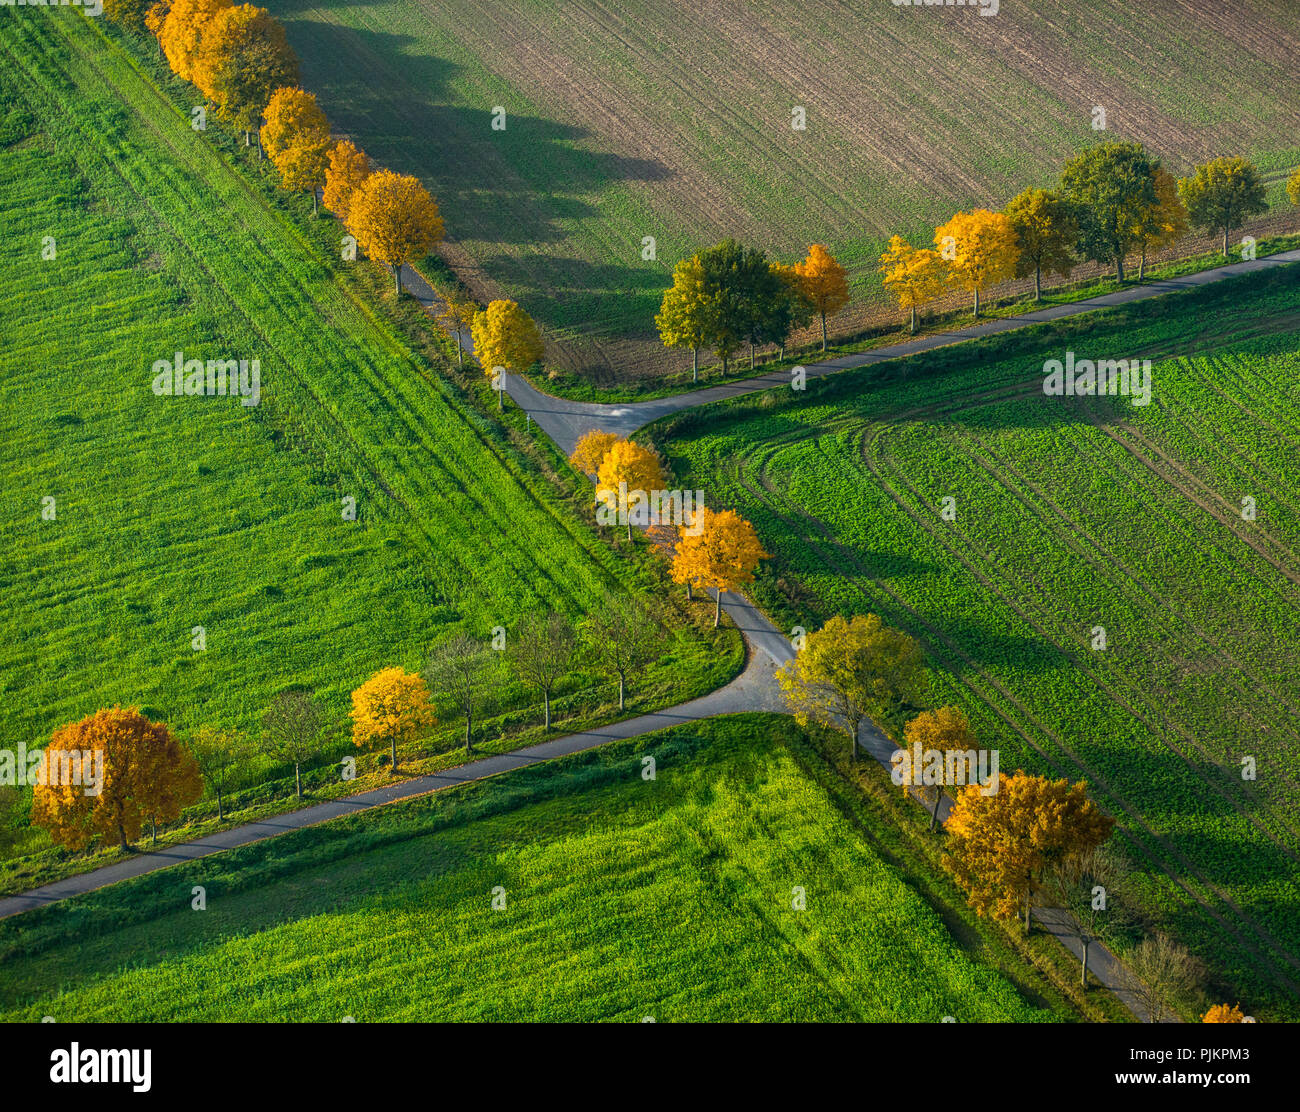 Tree Alley, Field Lanes, Crossroads, Double Crossing, Autumn Foliage, Autumn Leaves, Agriculture, Fields, Meadows, Fields, Symmetrical Junction, Nottuln, Münsterland, North Rhine-Westphalia, Germany Stock Photo